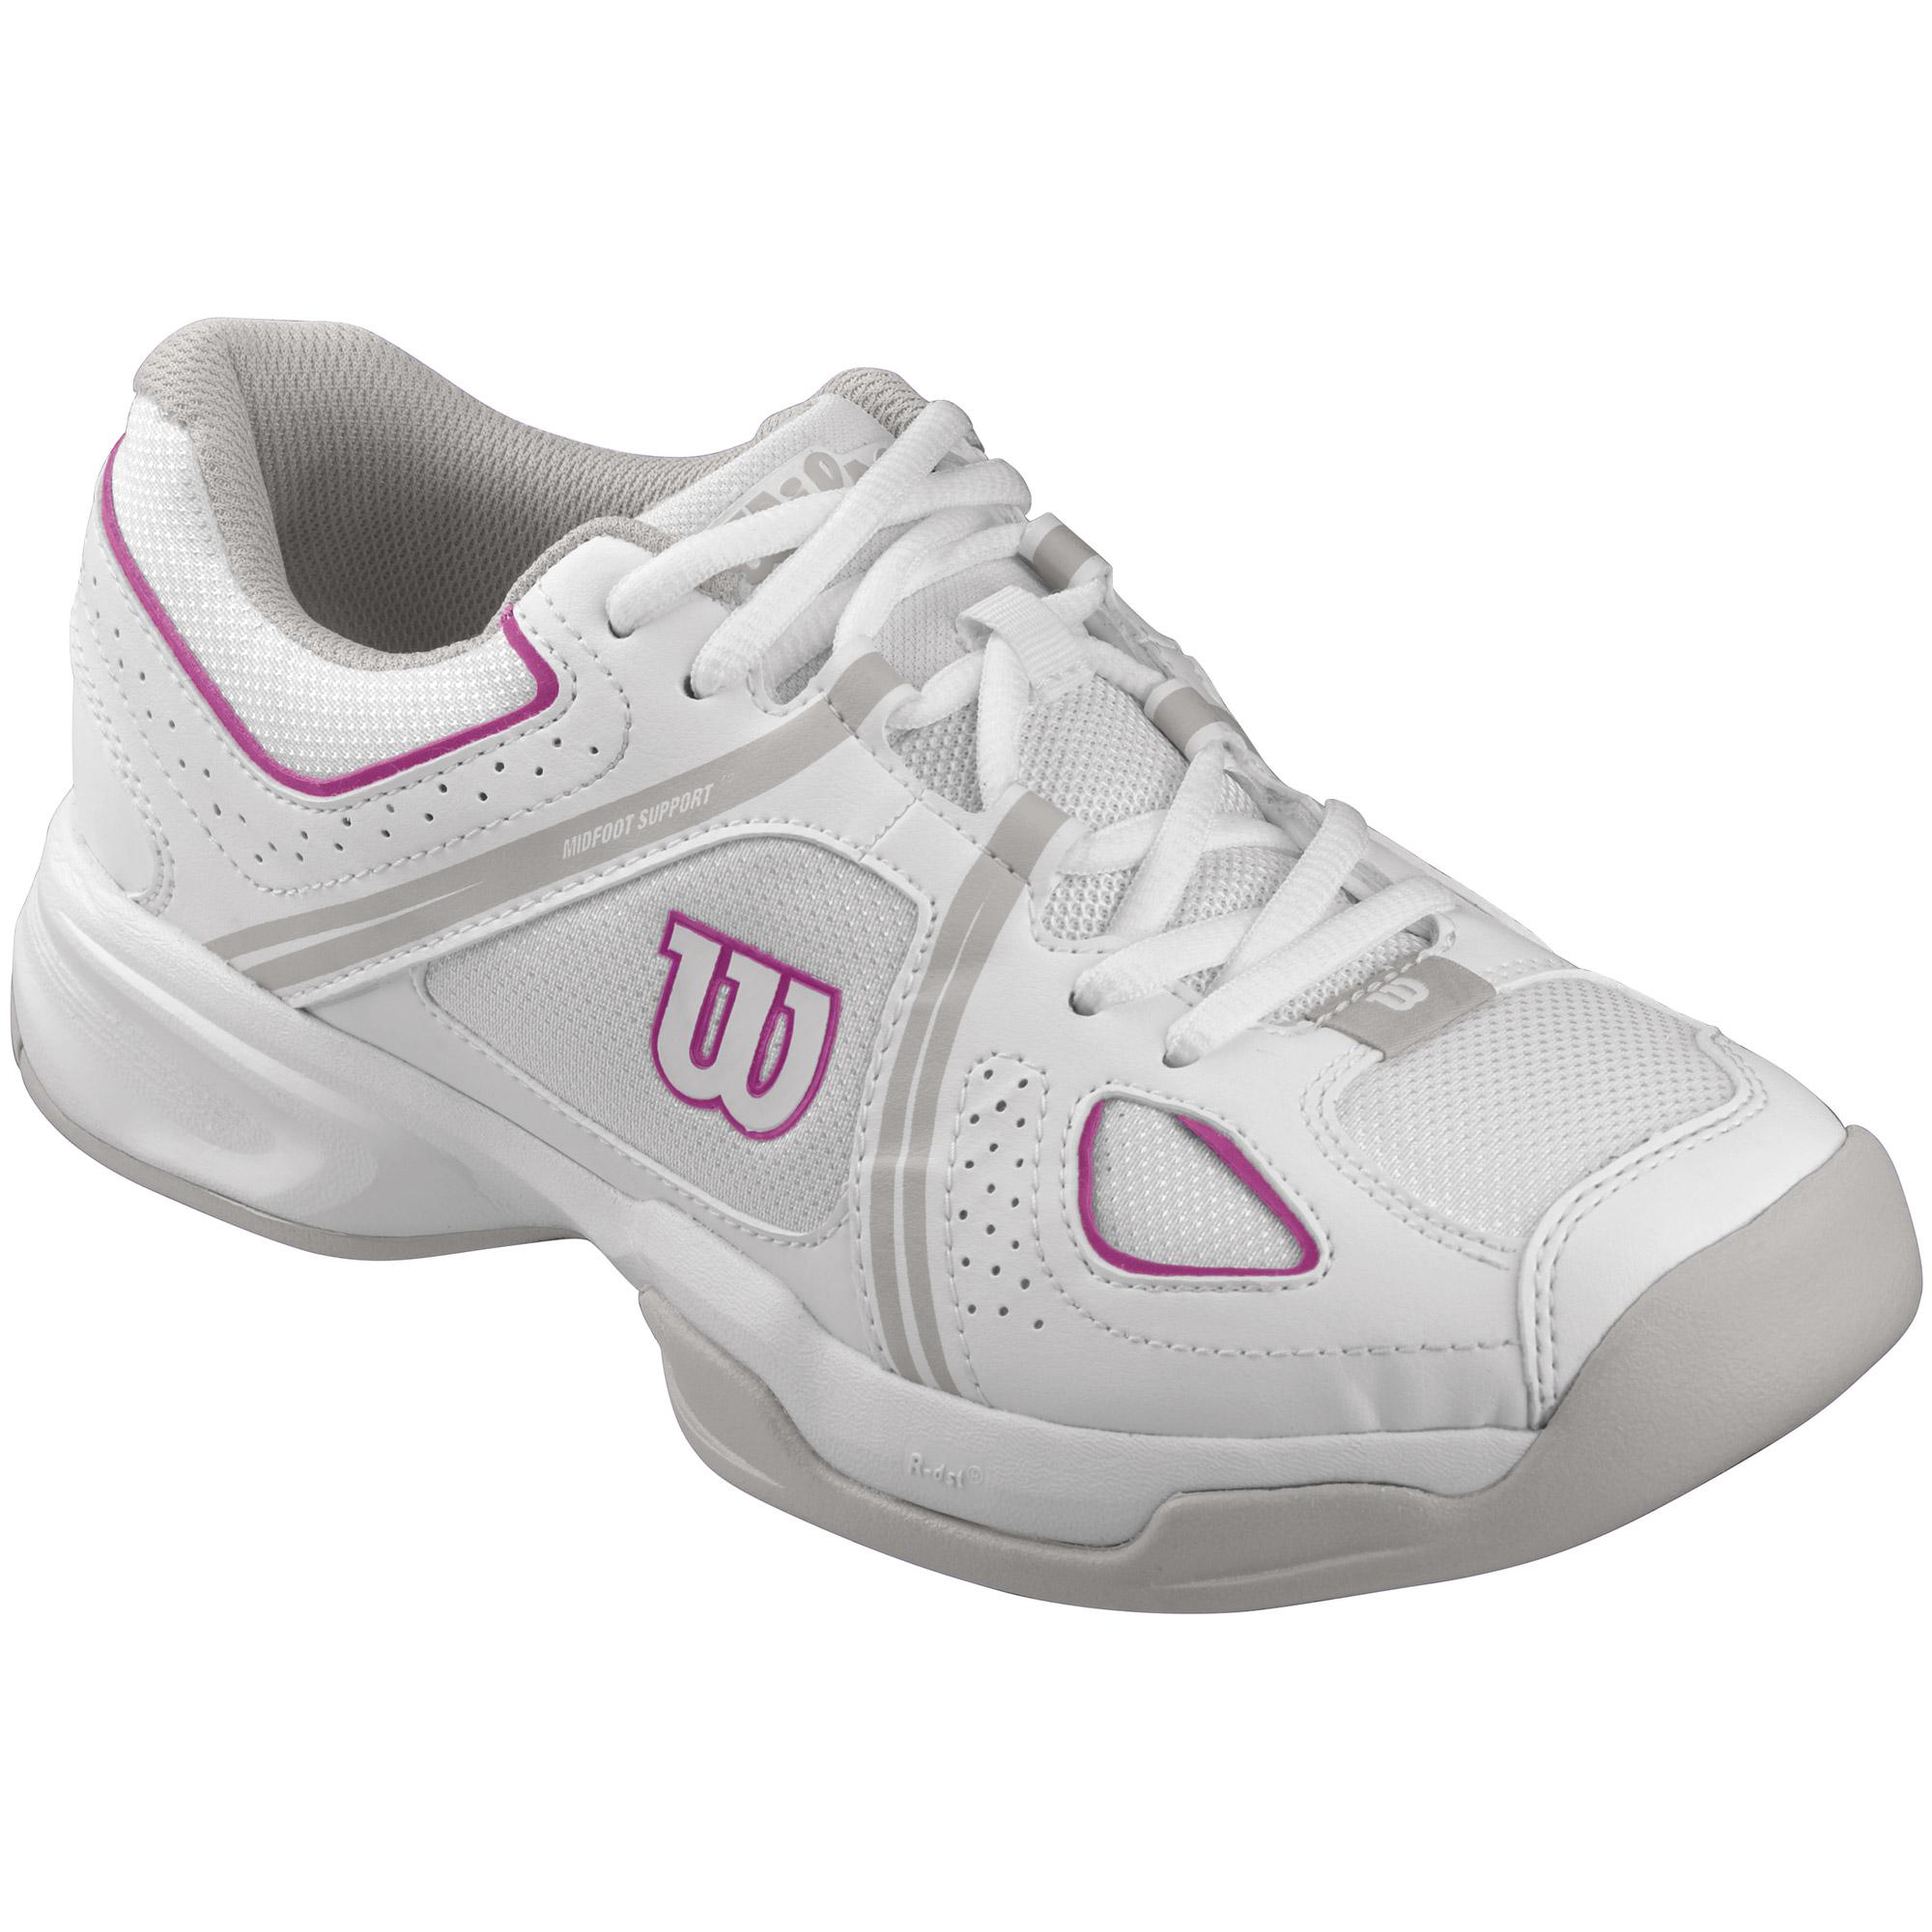 Wilson NVision Envy Ladies Tennis Shoes White/Pink 